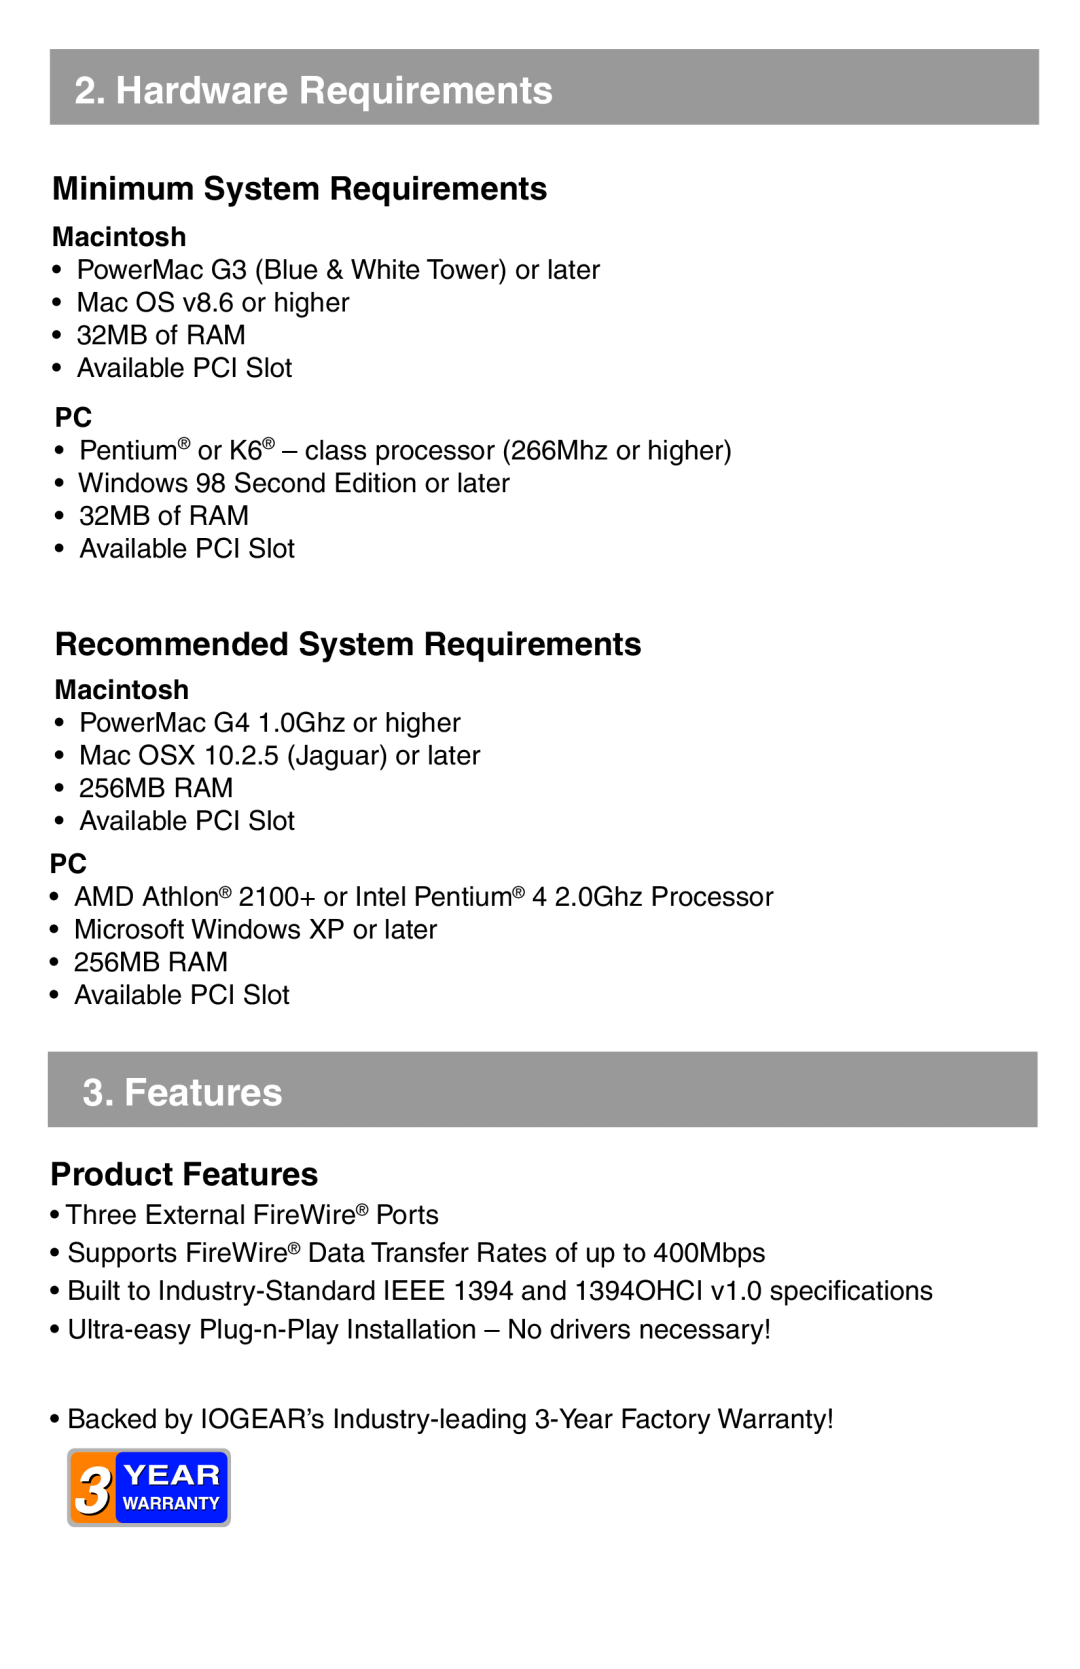 Nintendo GIC430F Hardware Requirements, Features, Minimum System Requirements, Recommended System Requirements, Macintosh 